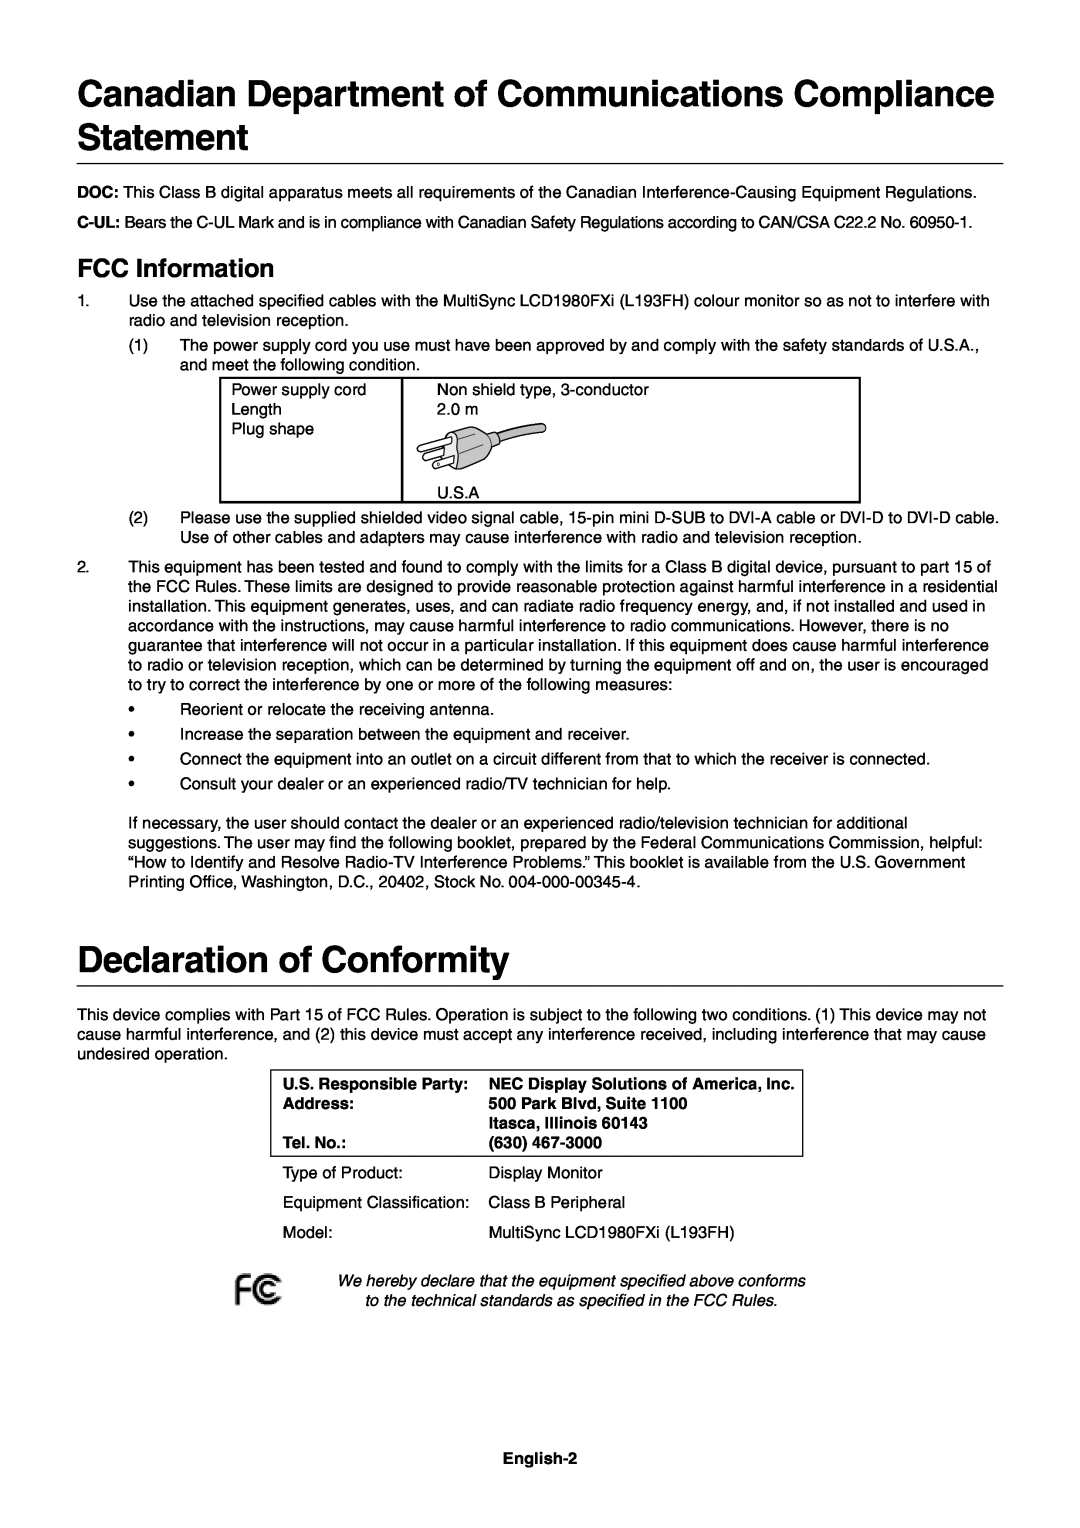 NEC 1980FXi Canadian Department of Communications Compliance Statement, Declaration of Conformity, FCC Information, Model 